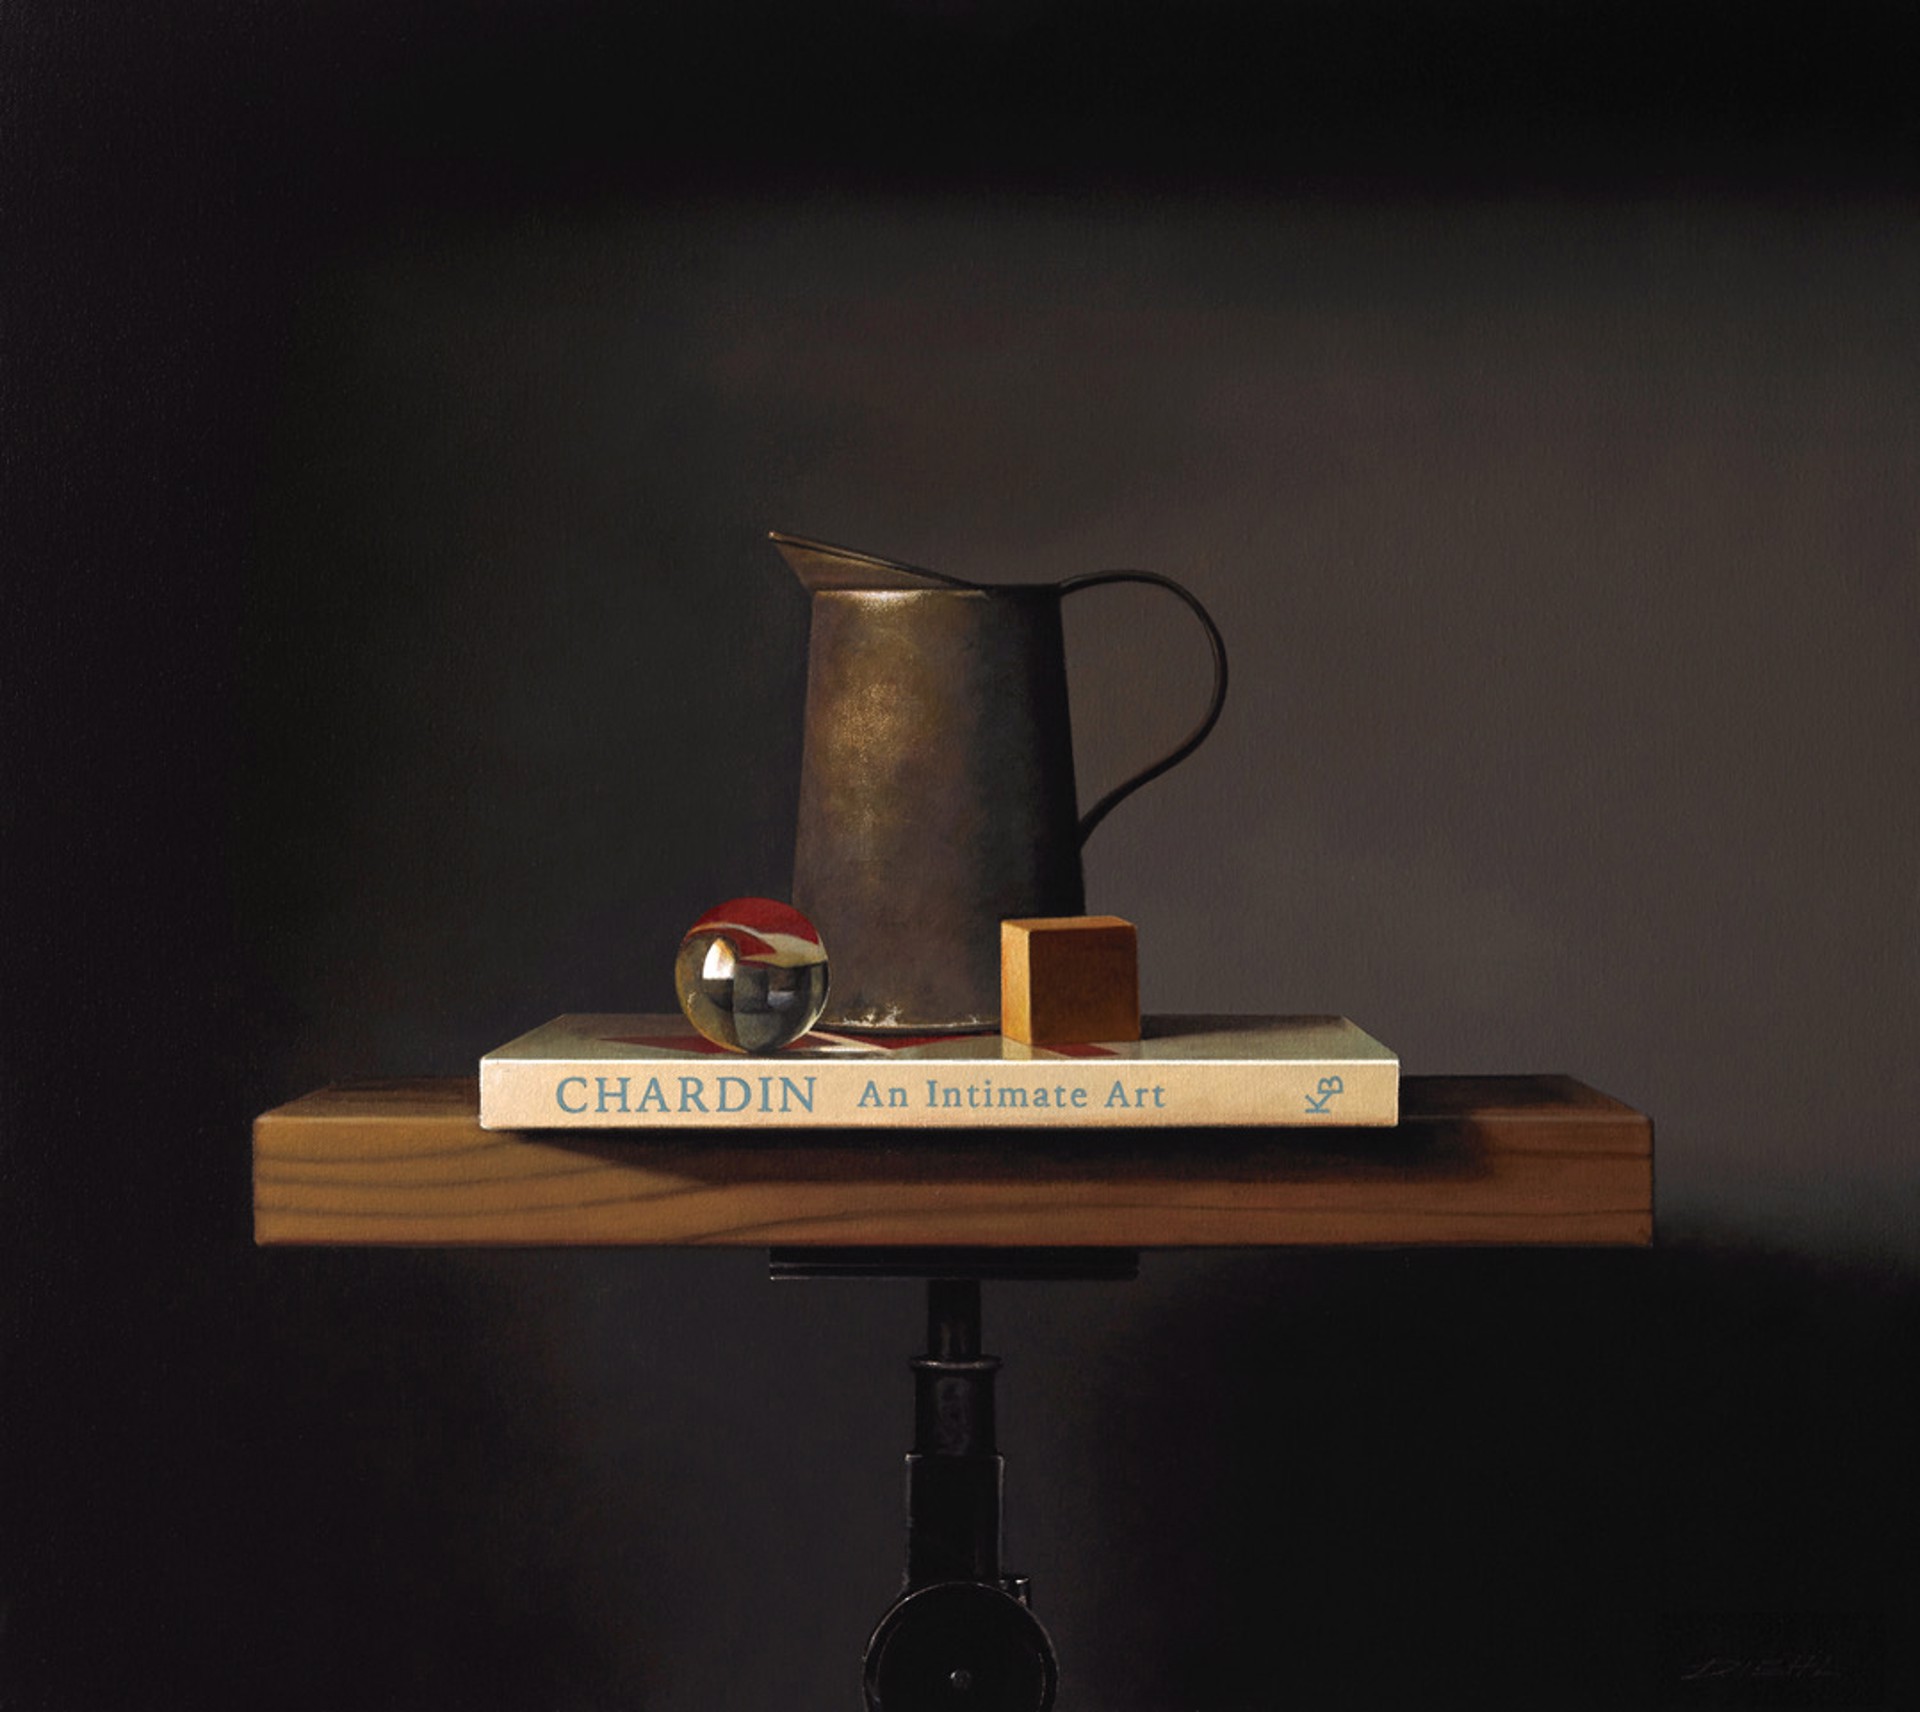 Conversation with Chardin by Guy Diehl